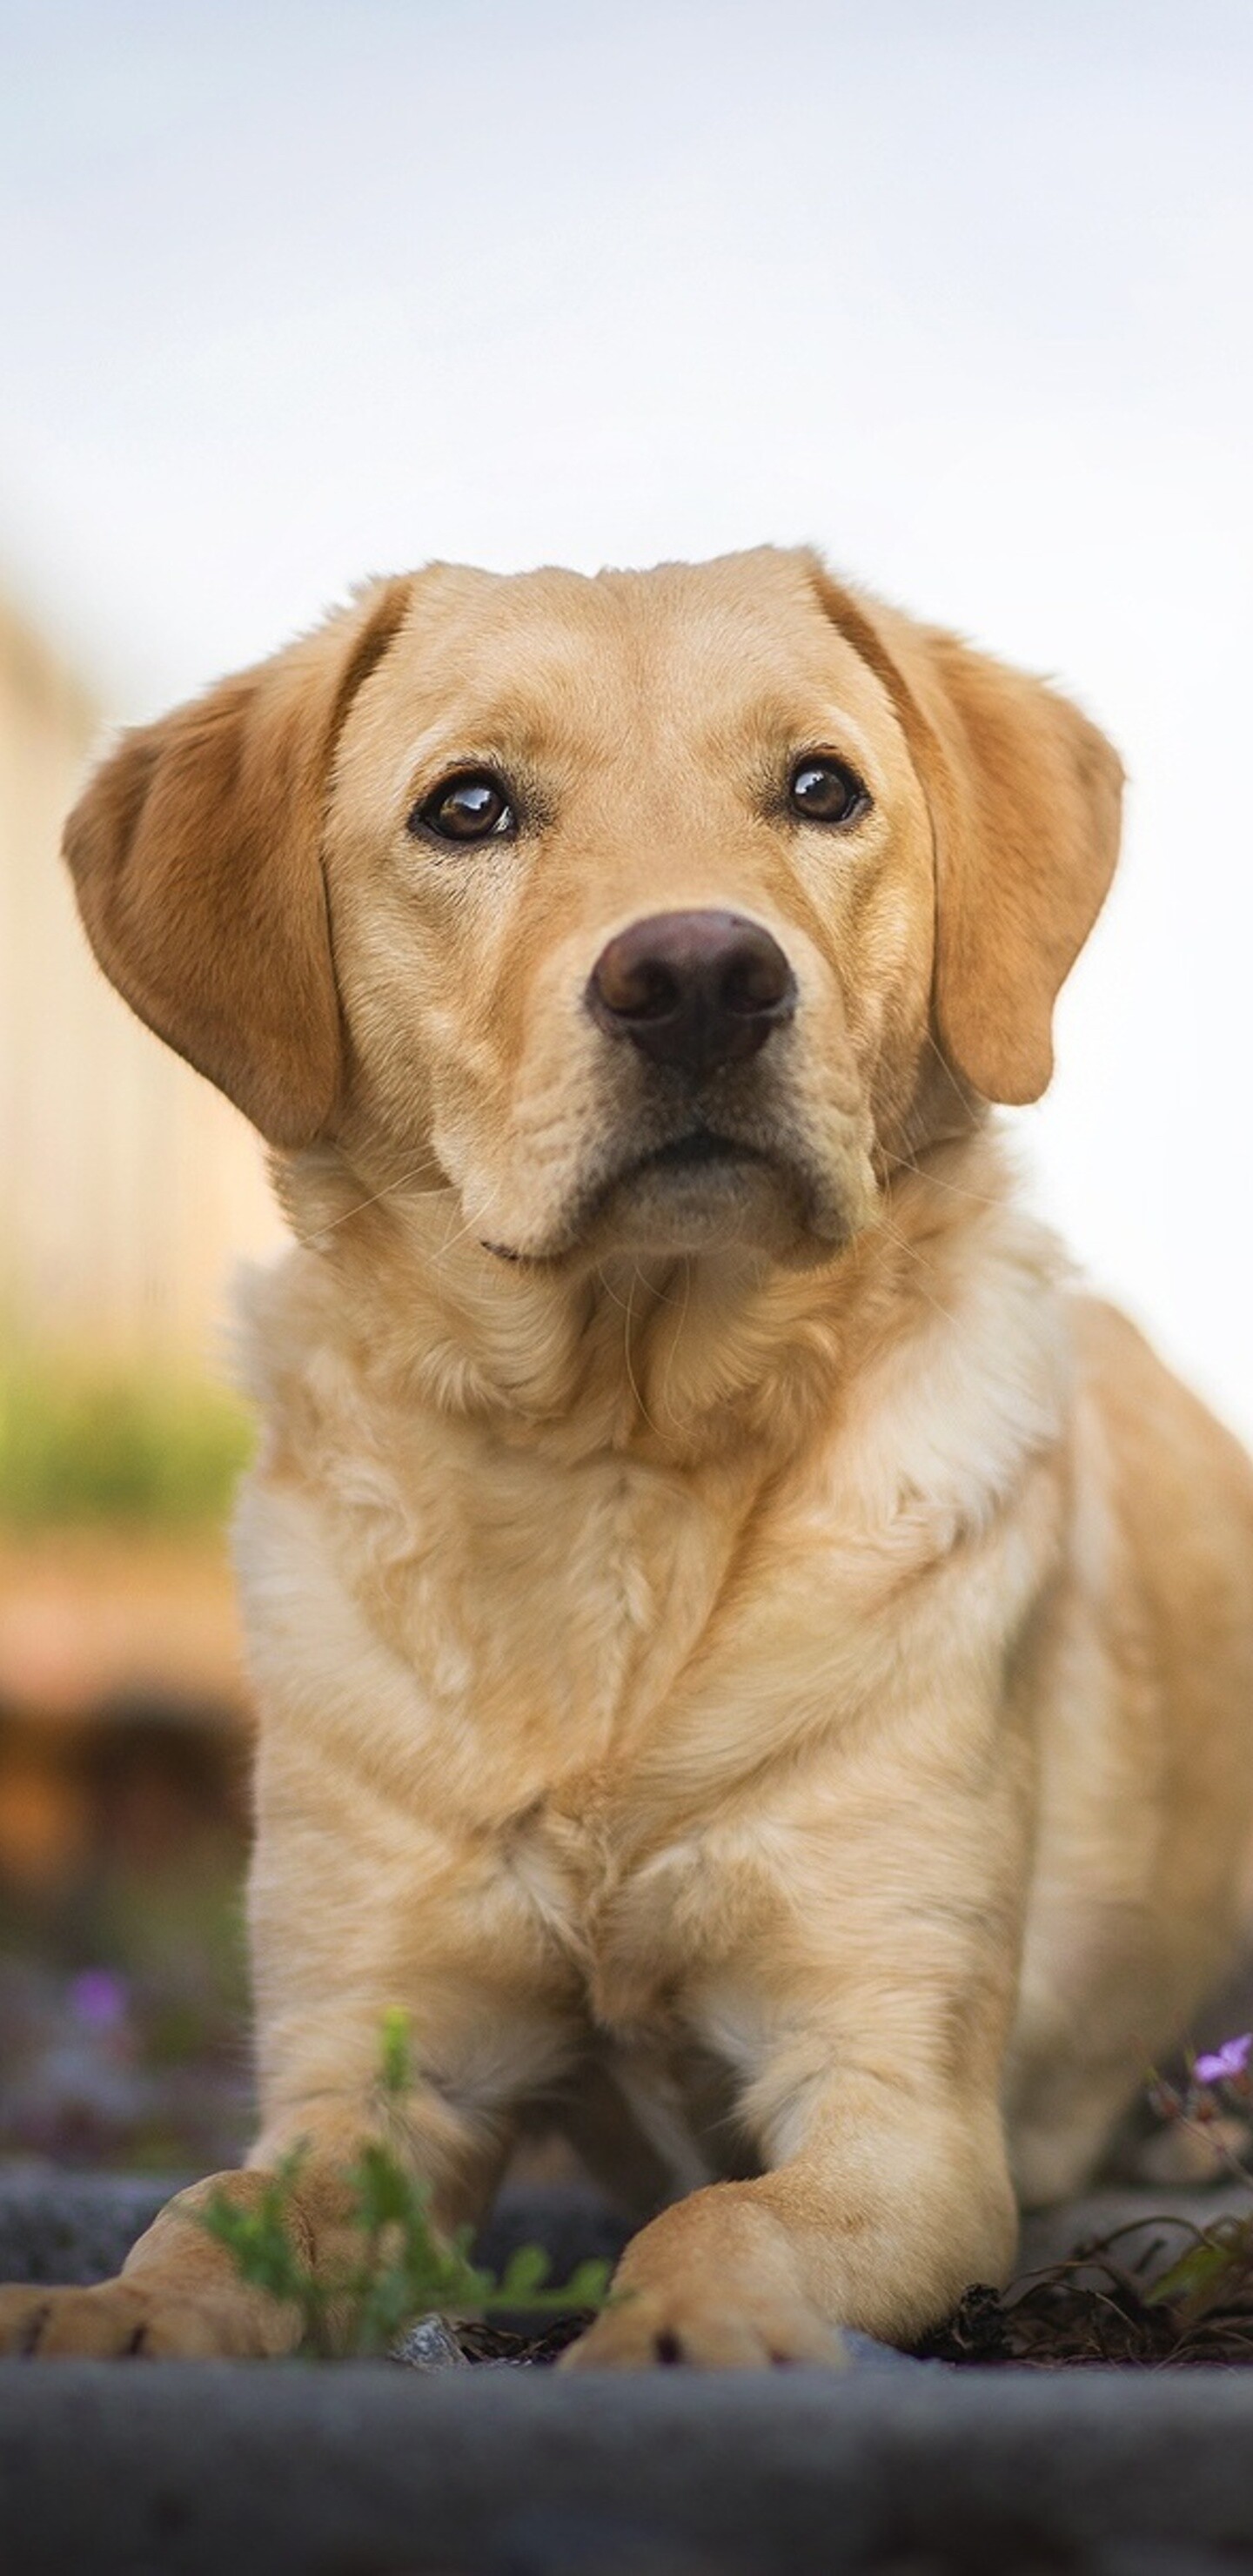 Labrador Retriever: The breed is registered in three colors: solid black, yellow, and chocolate. 1440x2960 HD Wallpaper.